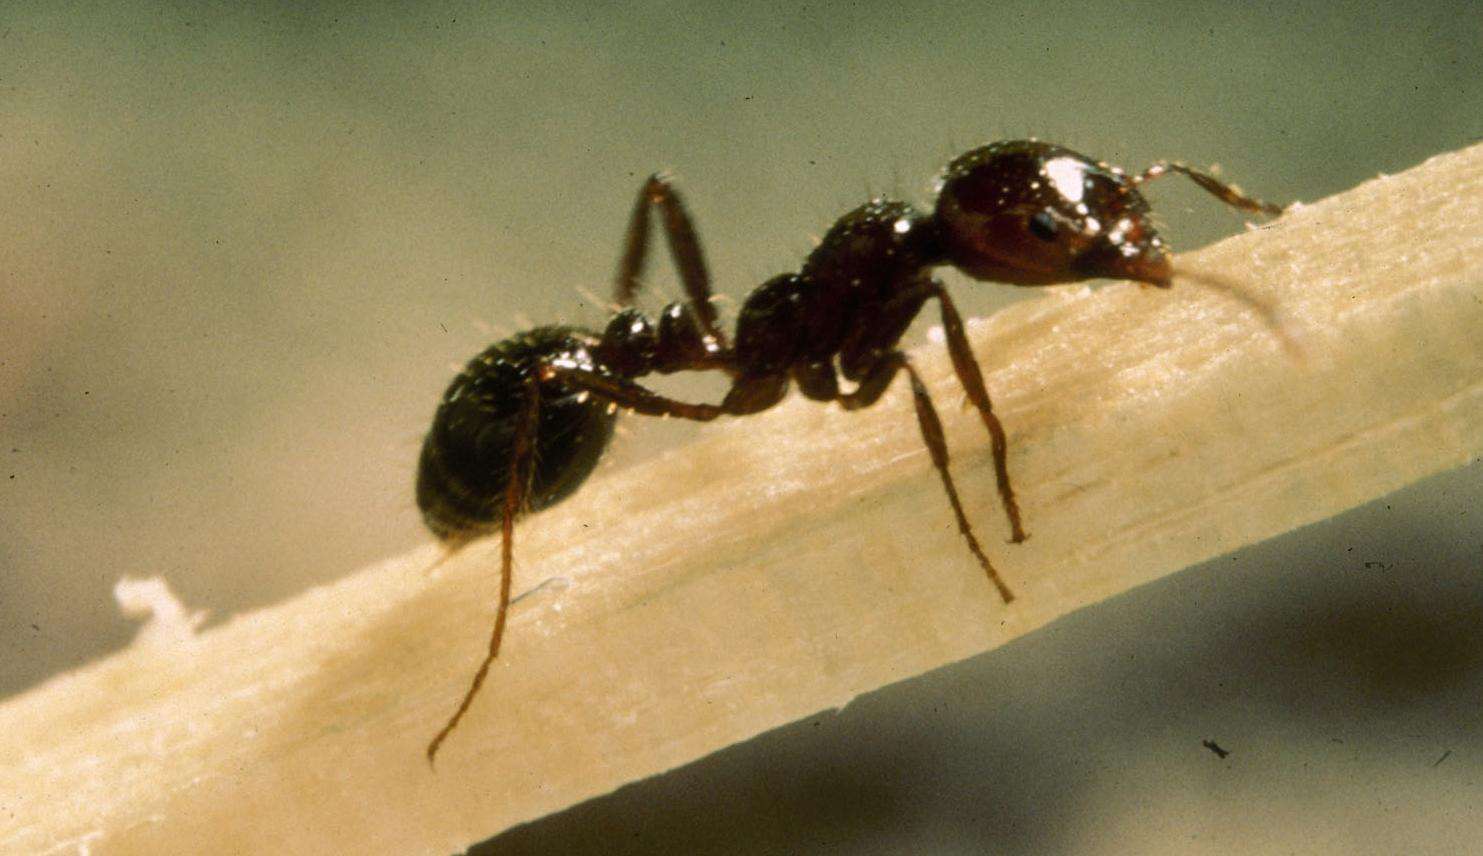 Red imported fire ant crawling on young tree branch.